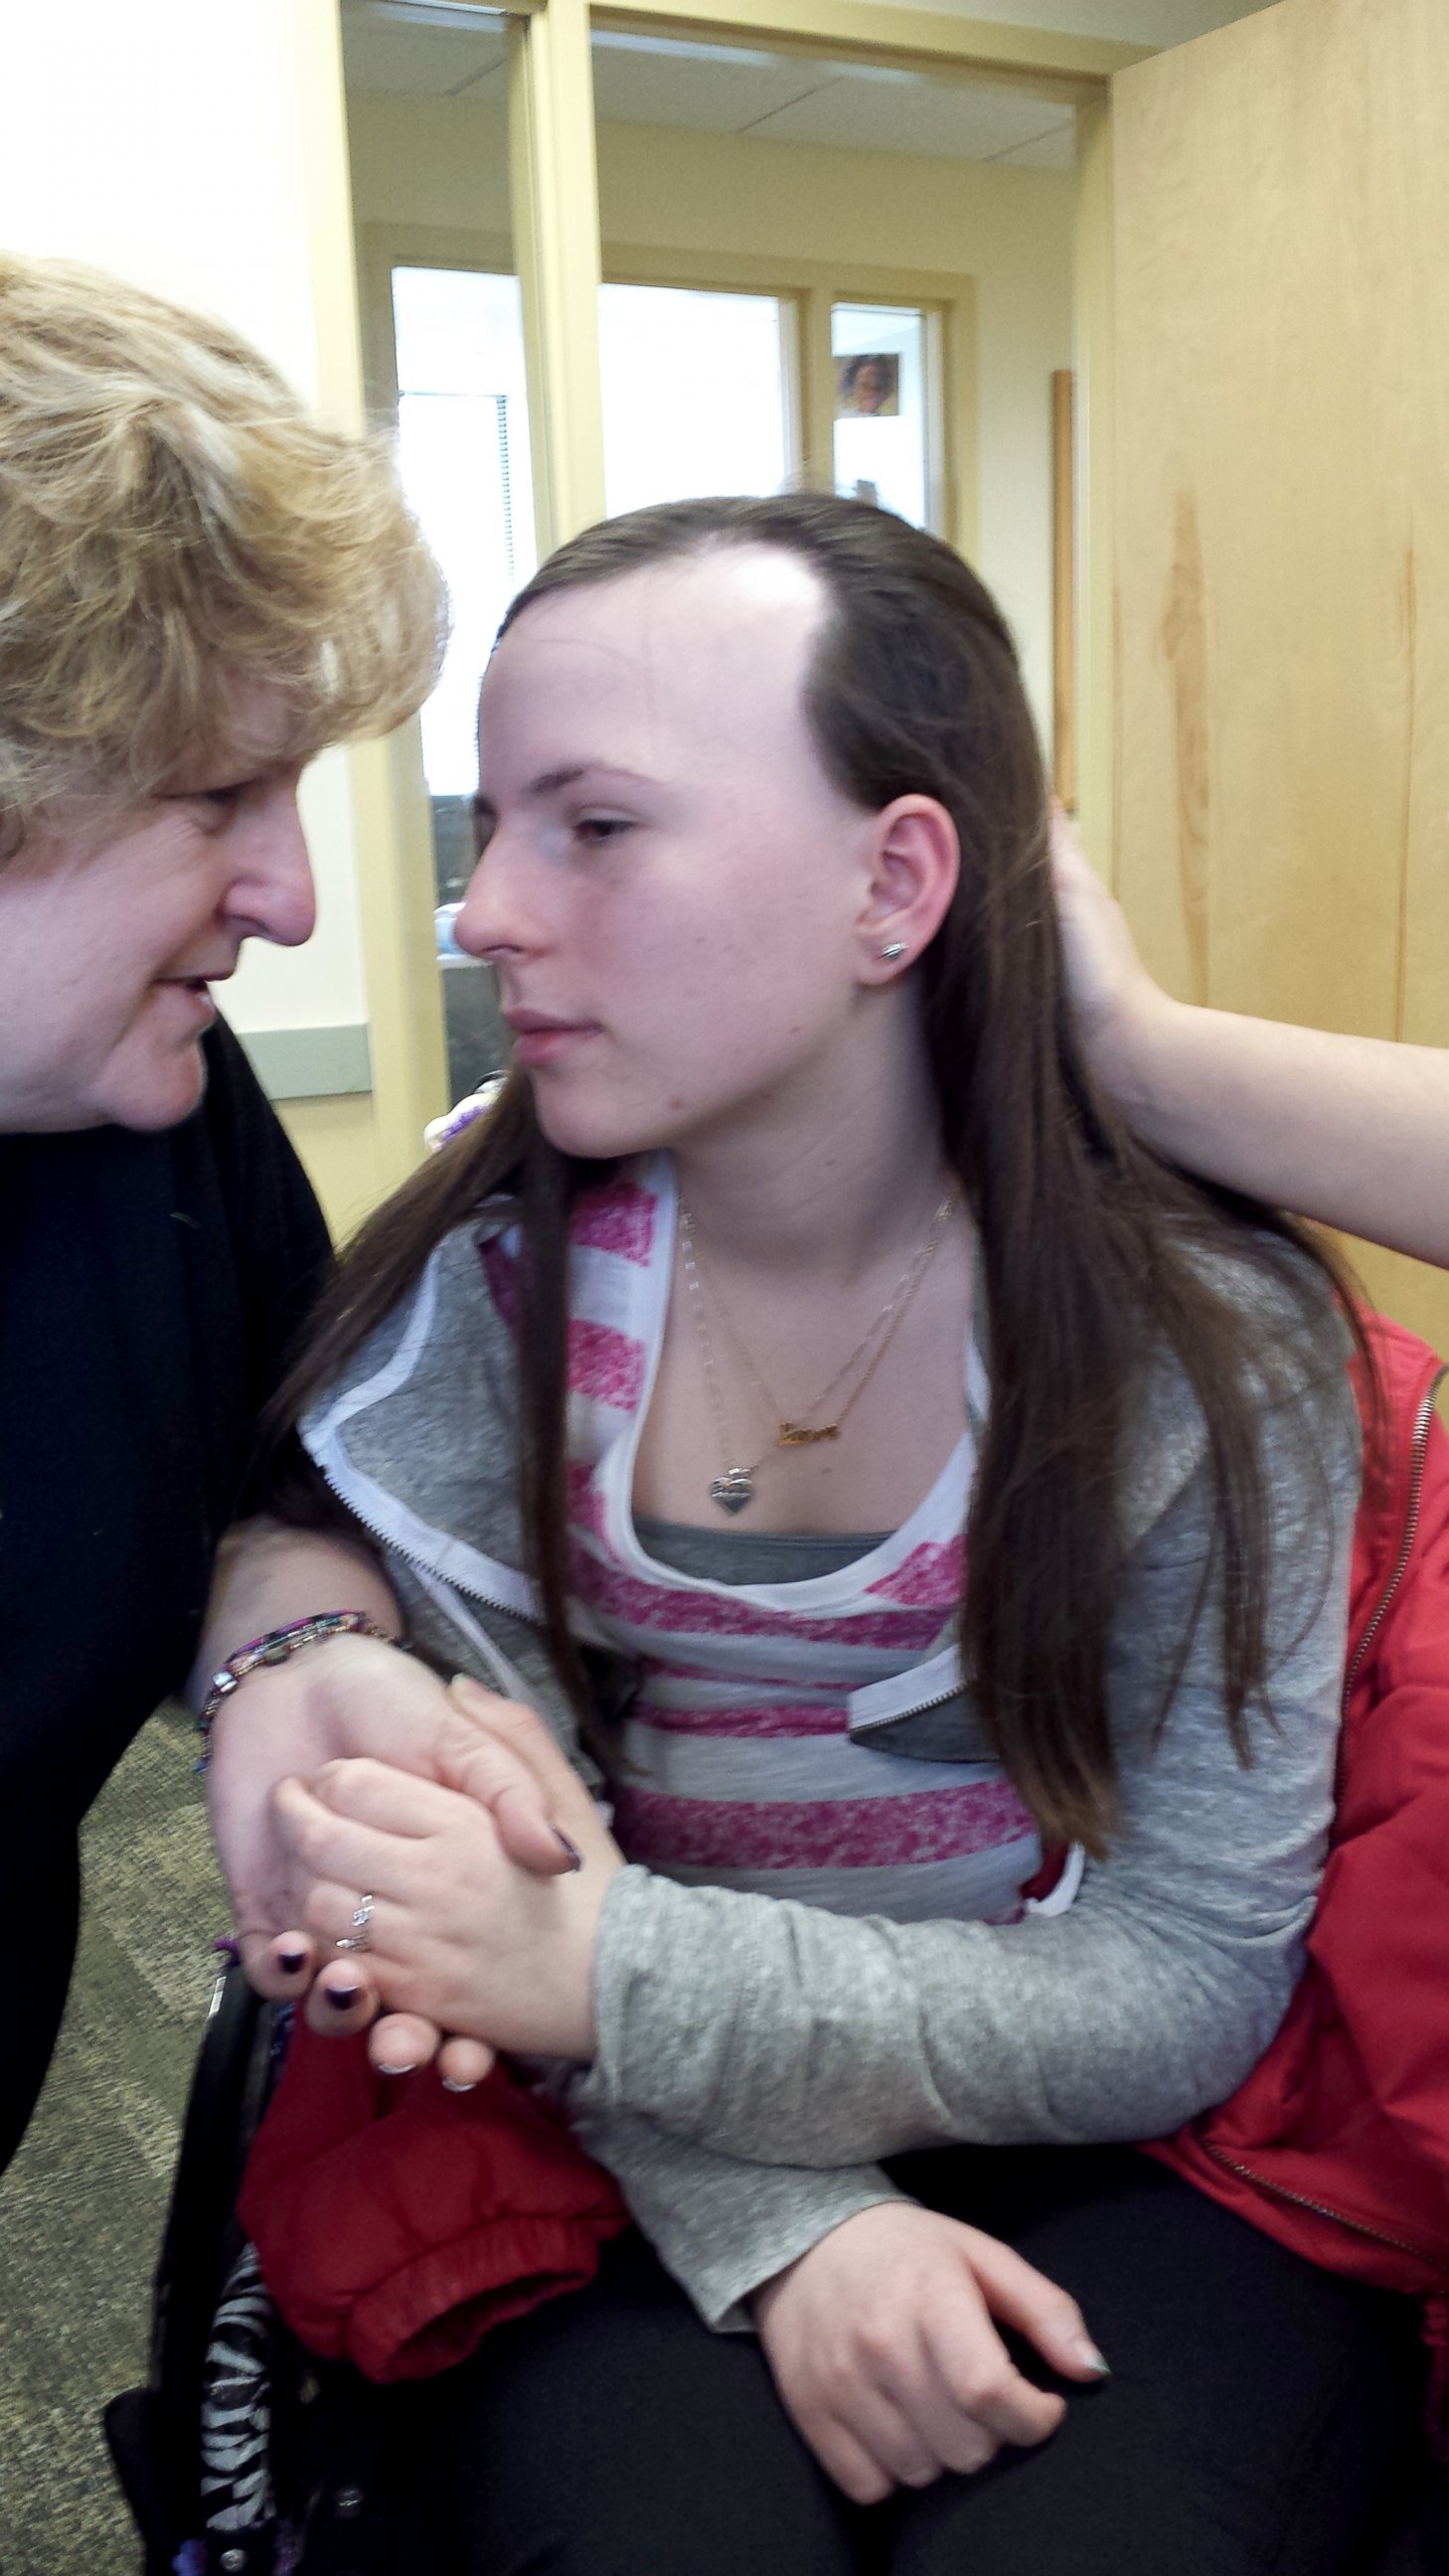 PHOTO: Justina Pelletier with her mother, Linda Pelletier, who said her daughter is losing hair because of lack of medical care.